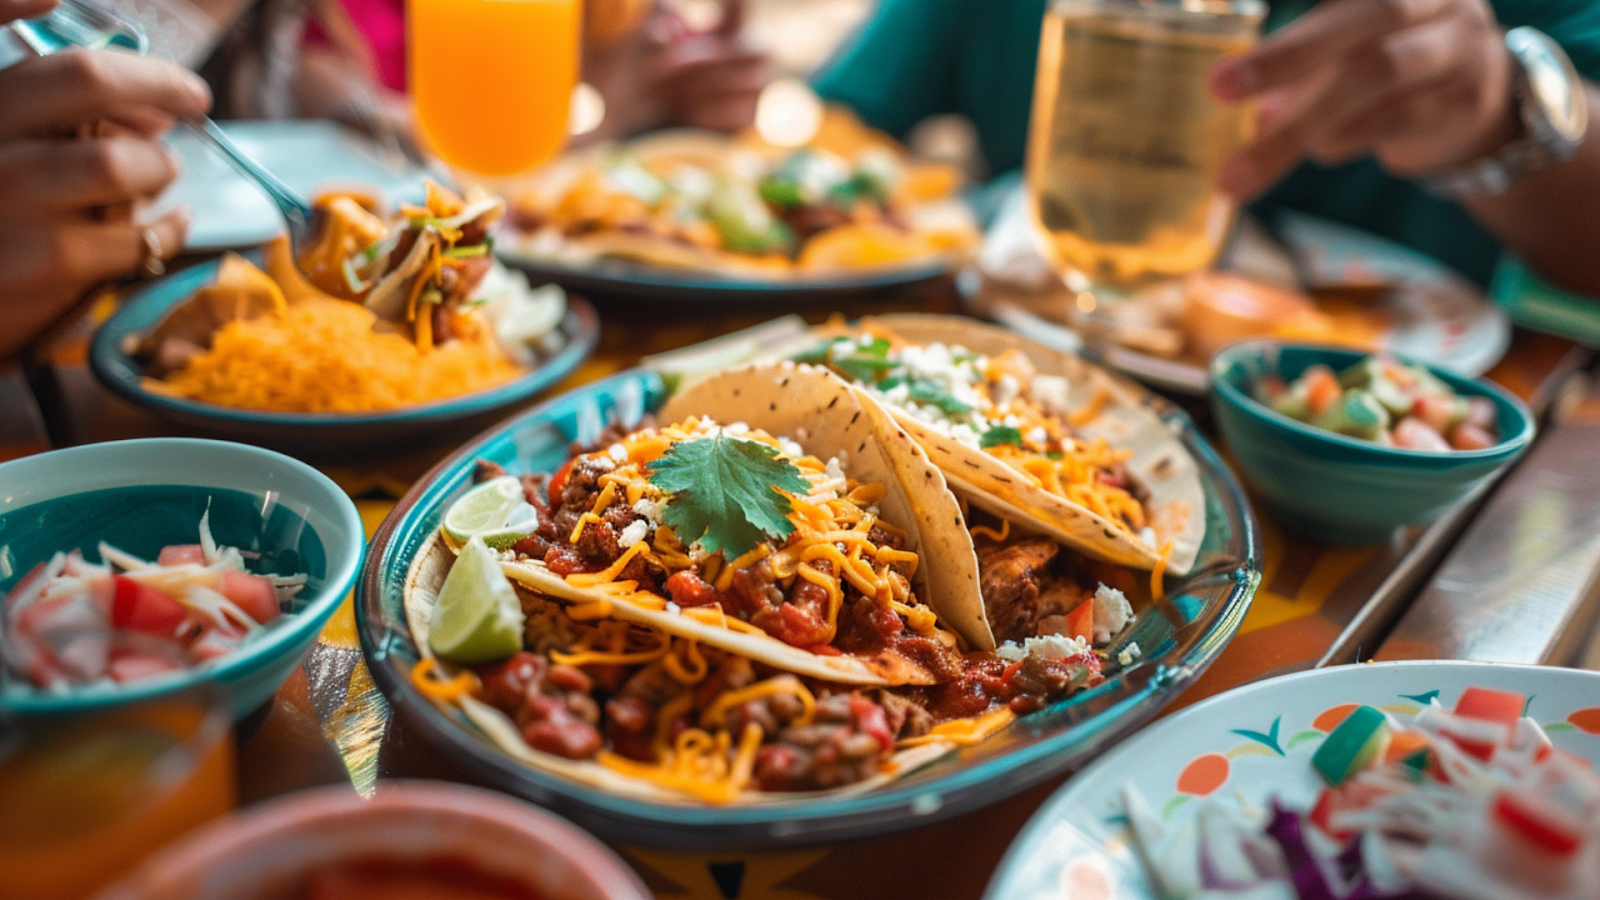 A table with a plate of tacos and other authentic Mexican dishes